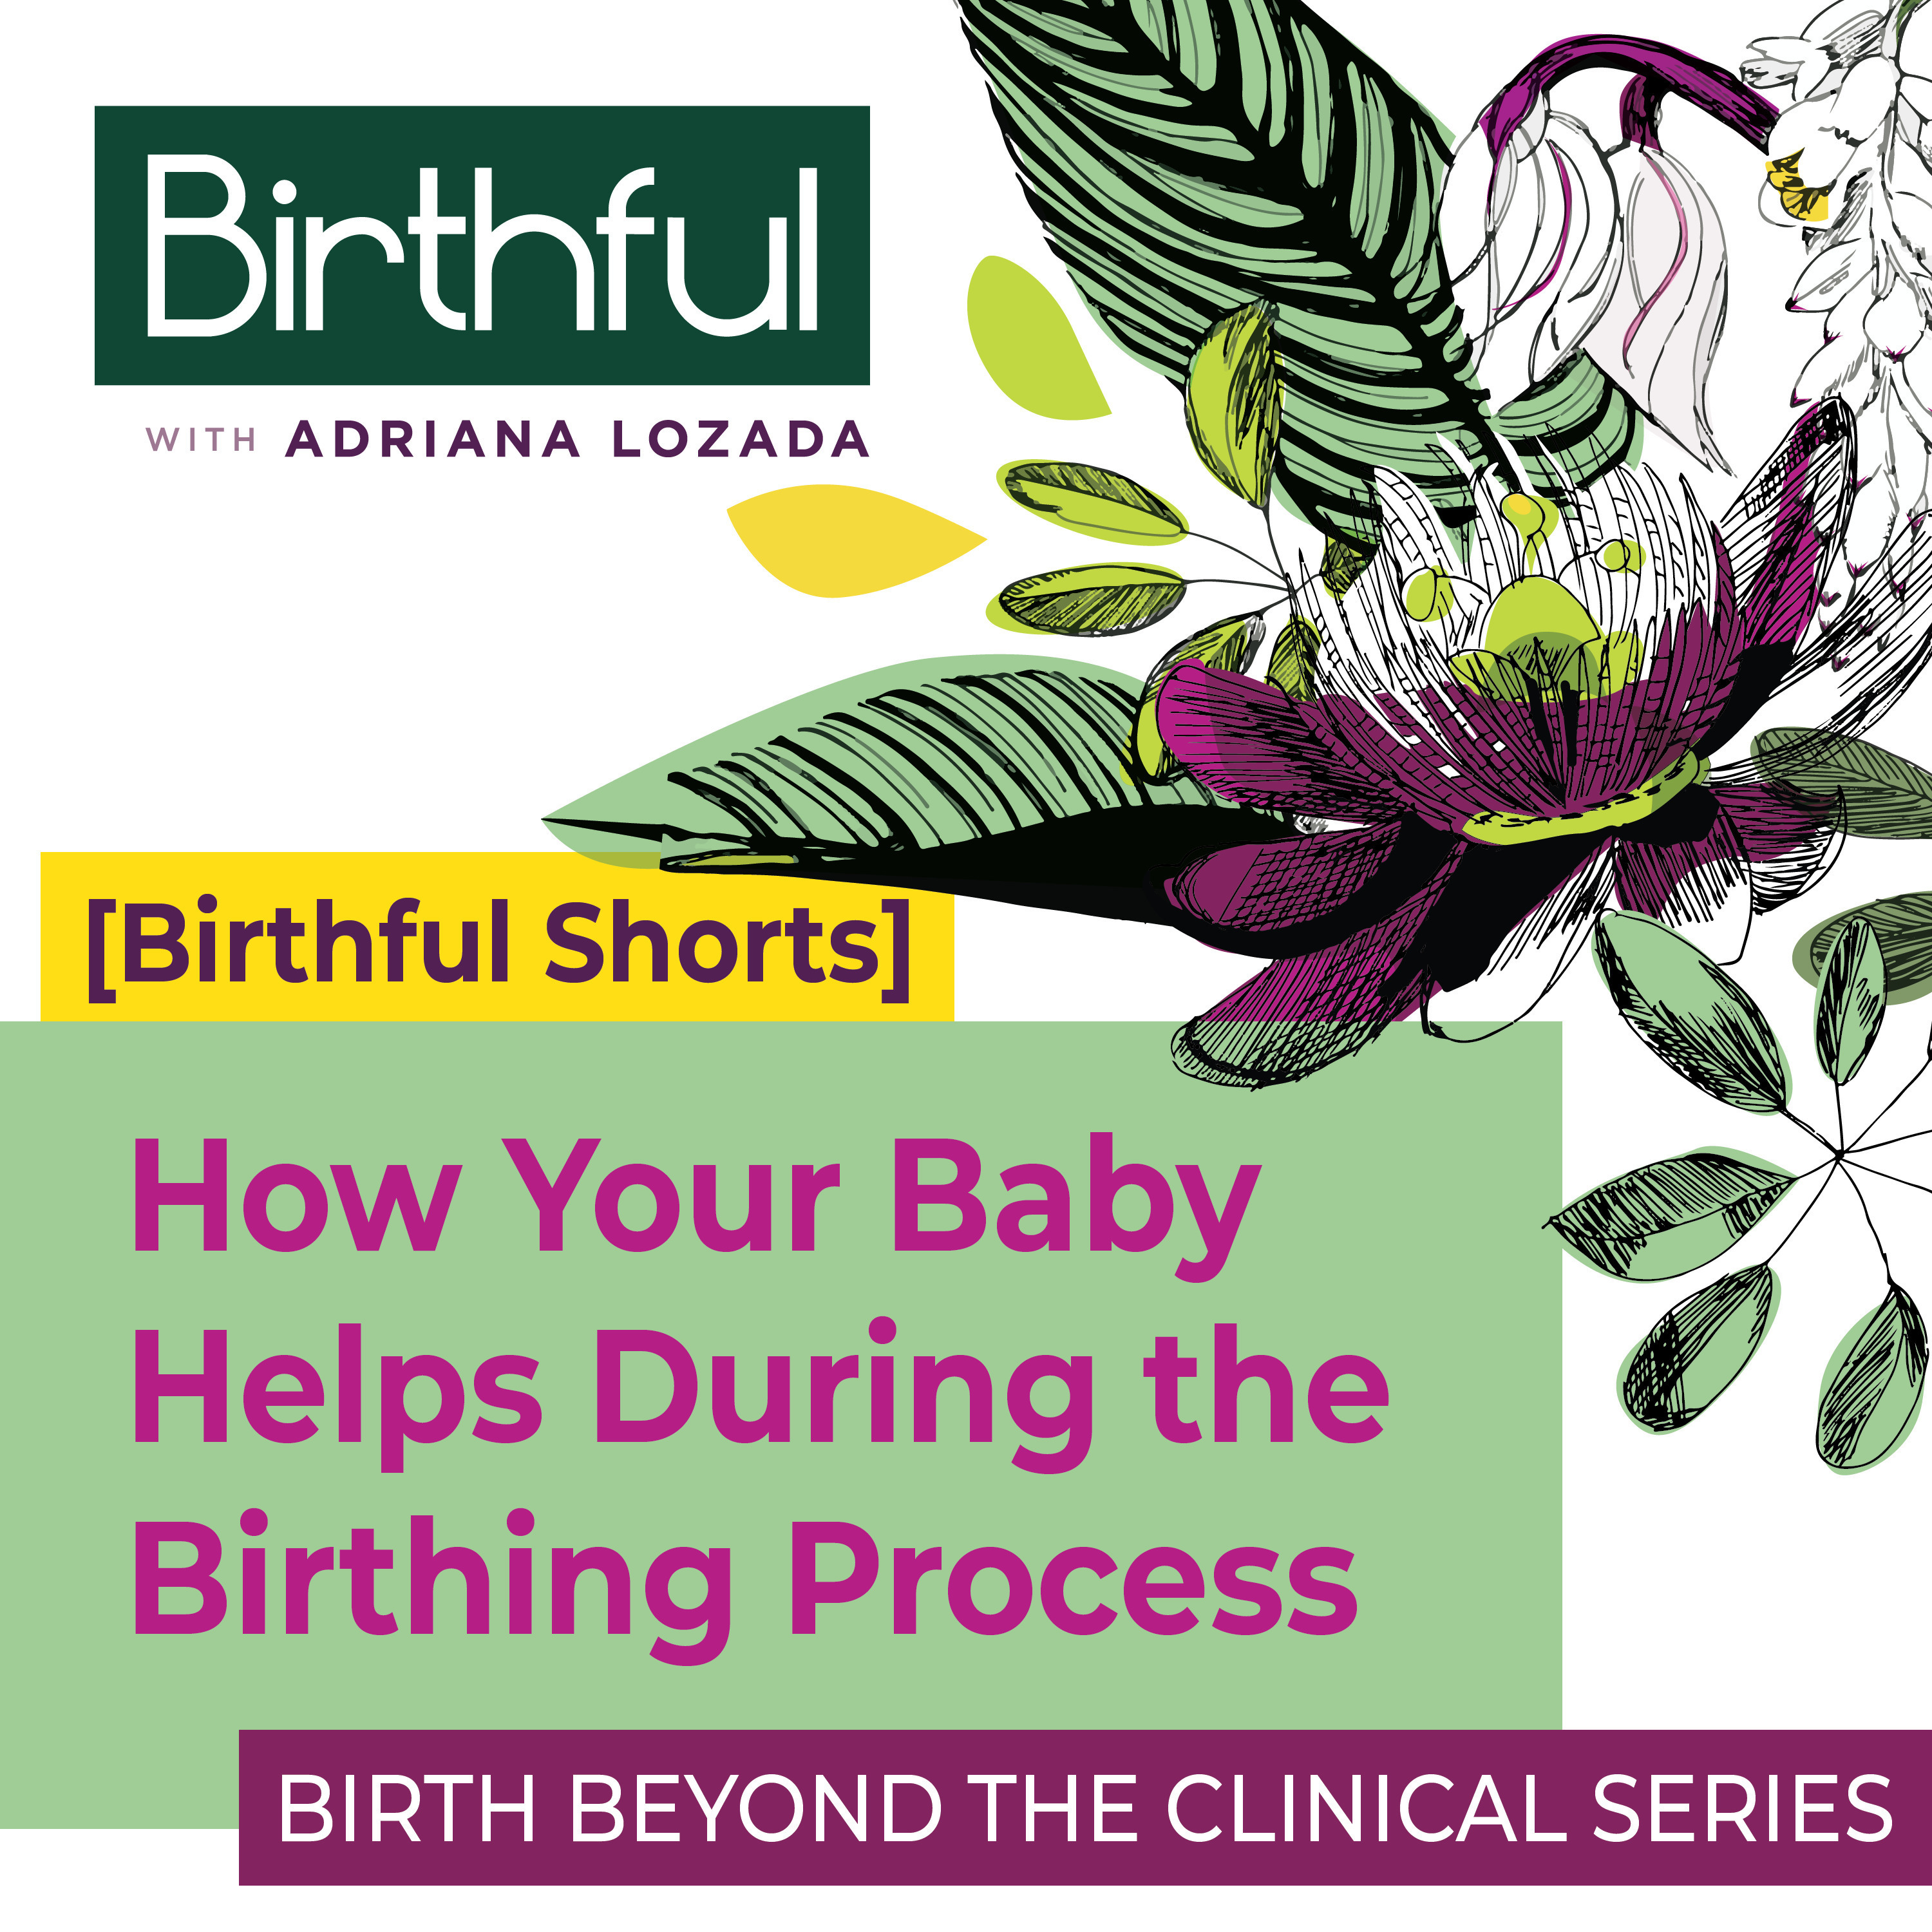 How Your Baby Helps During the Birthing Process